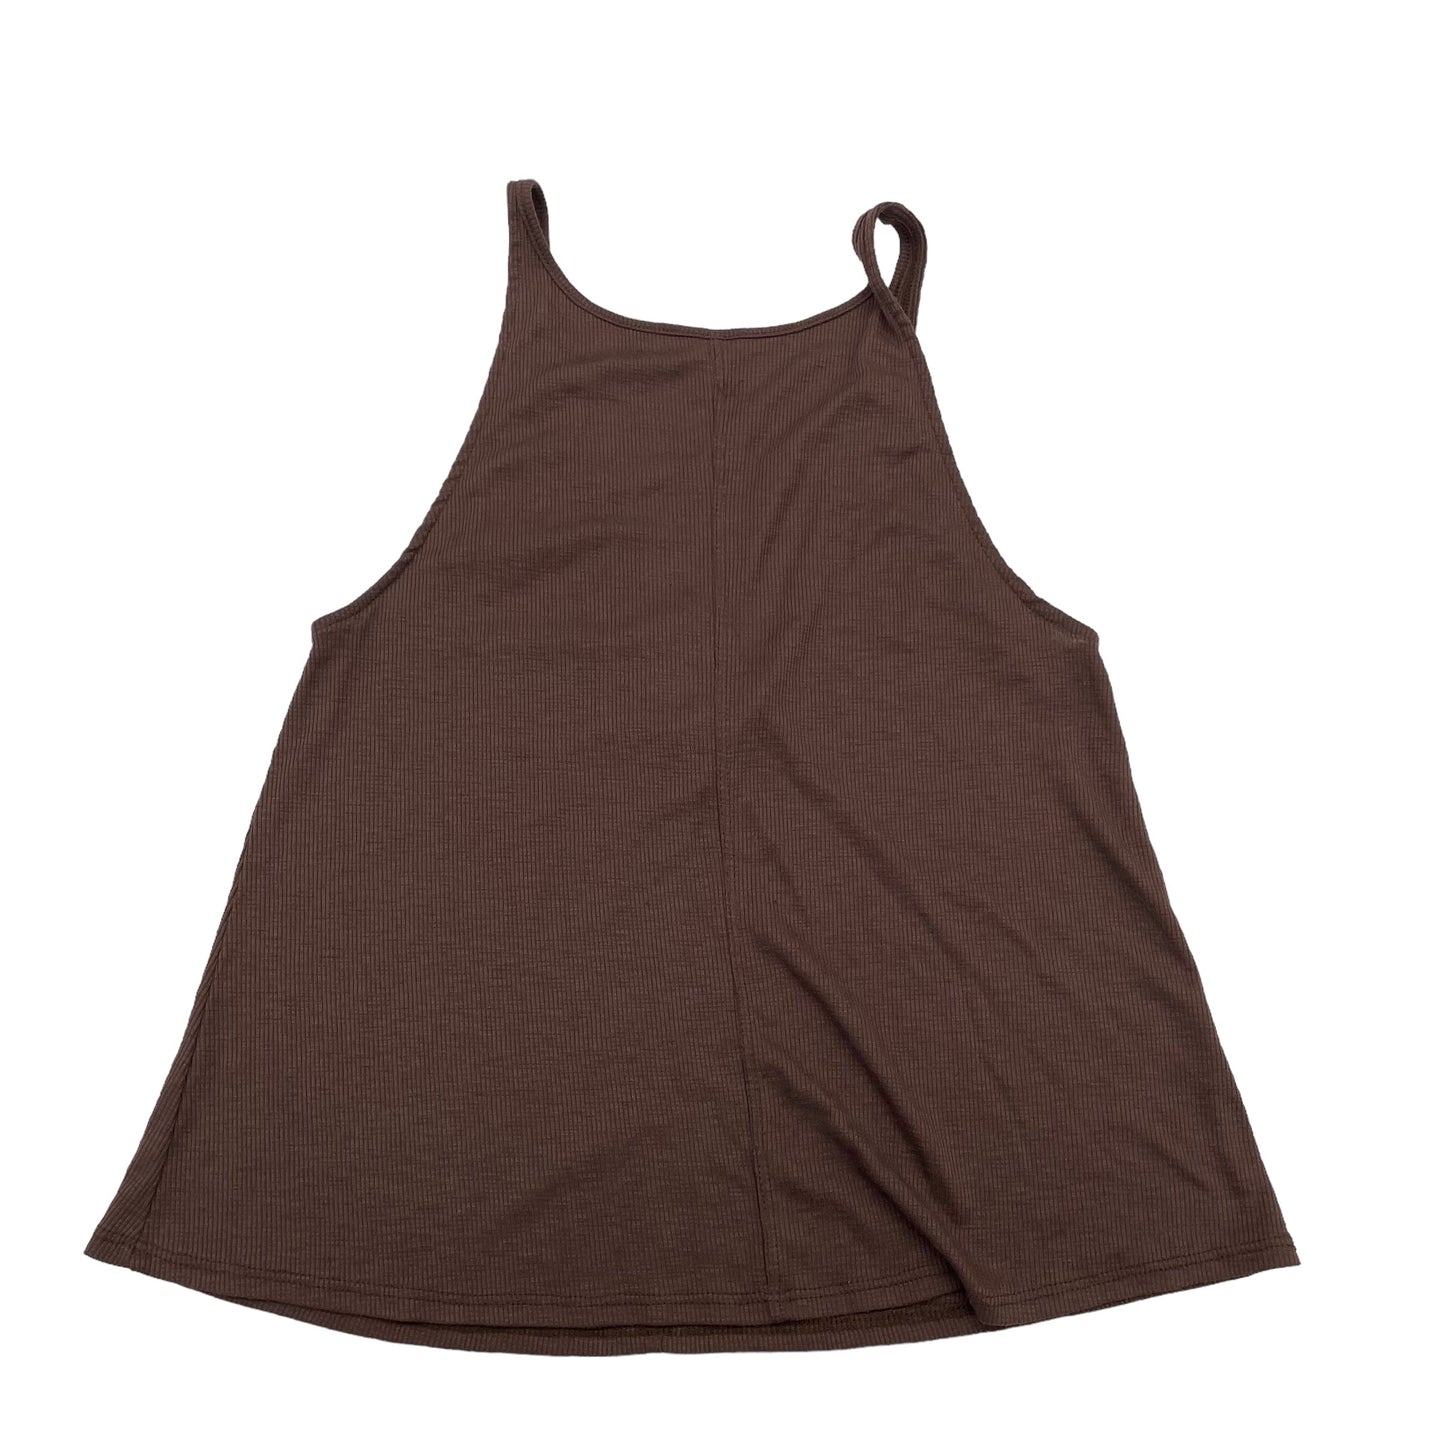 Brown Tank Top Free People, Size S